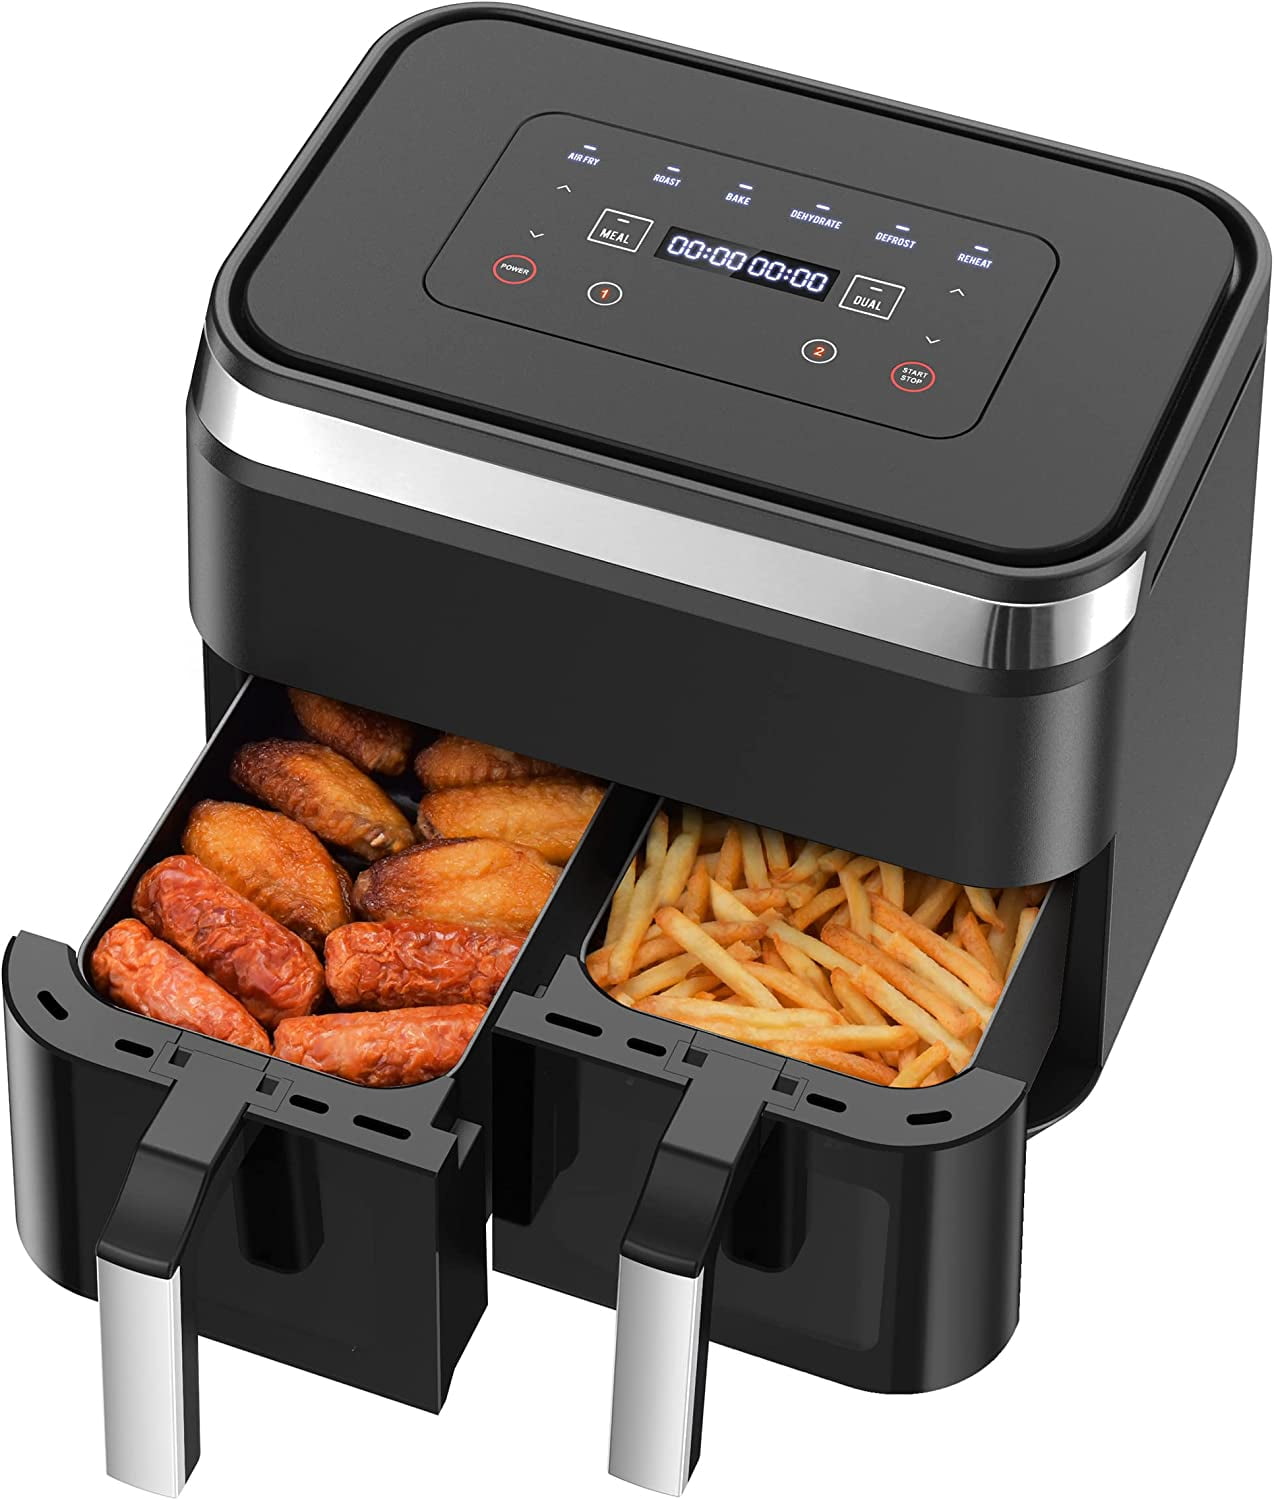 12.6 Quart Air Fryer built-in ninja power convection oven with dehydra–  mommyfanatic